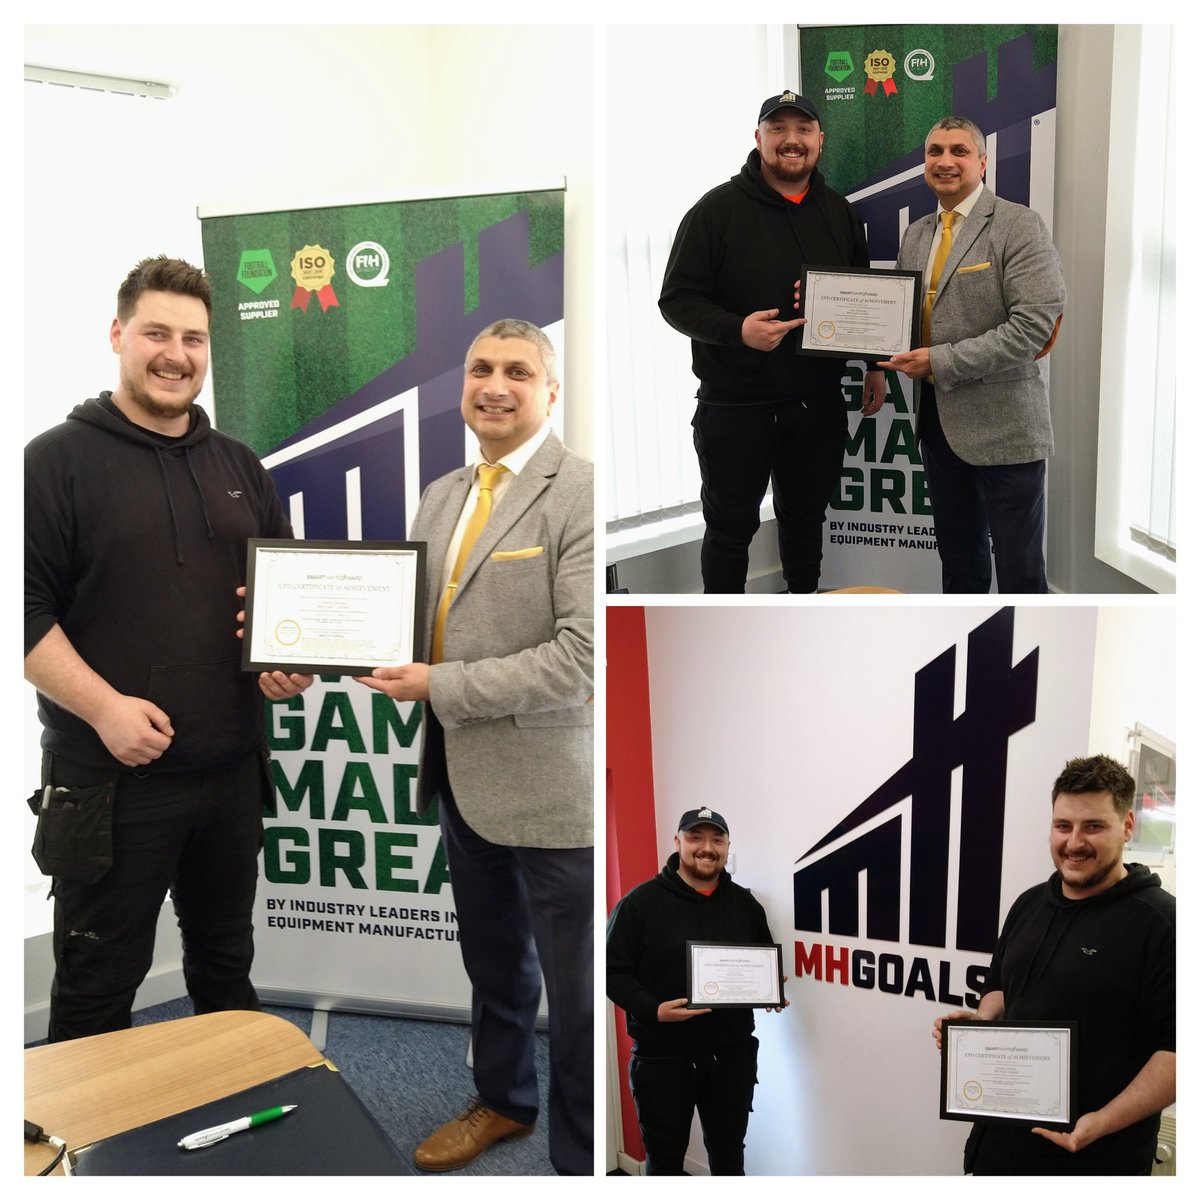 Congratulations to Charlie & Luke @lukesp02 from our good friends @MHGoals who have successfully completed their bespoke SMART #Leadership training programme this week. Well done to both of you! #AlwaysBeTheBestThatYouCanBe #NeverStopLearning